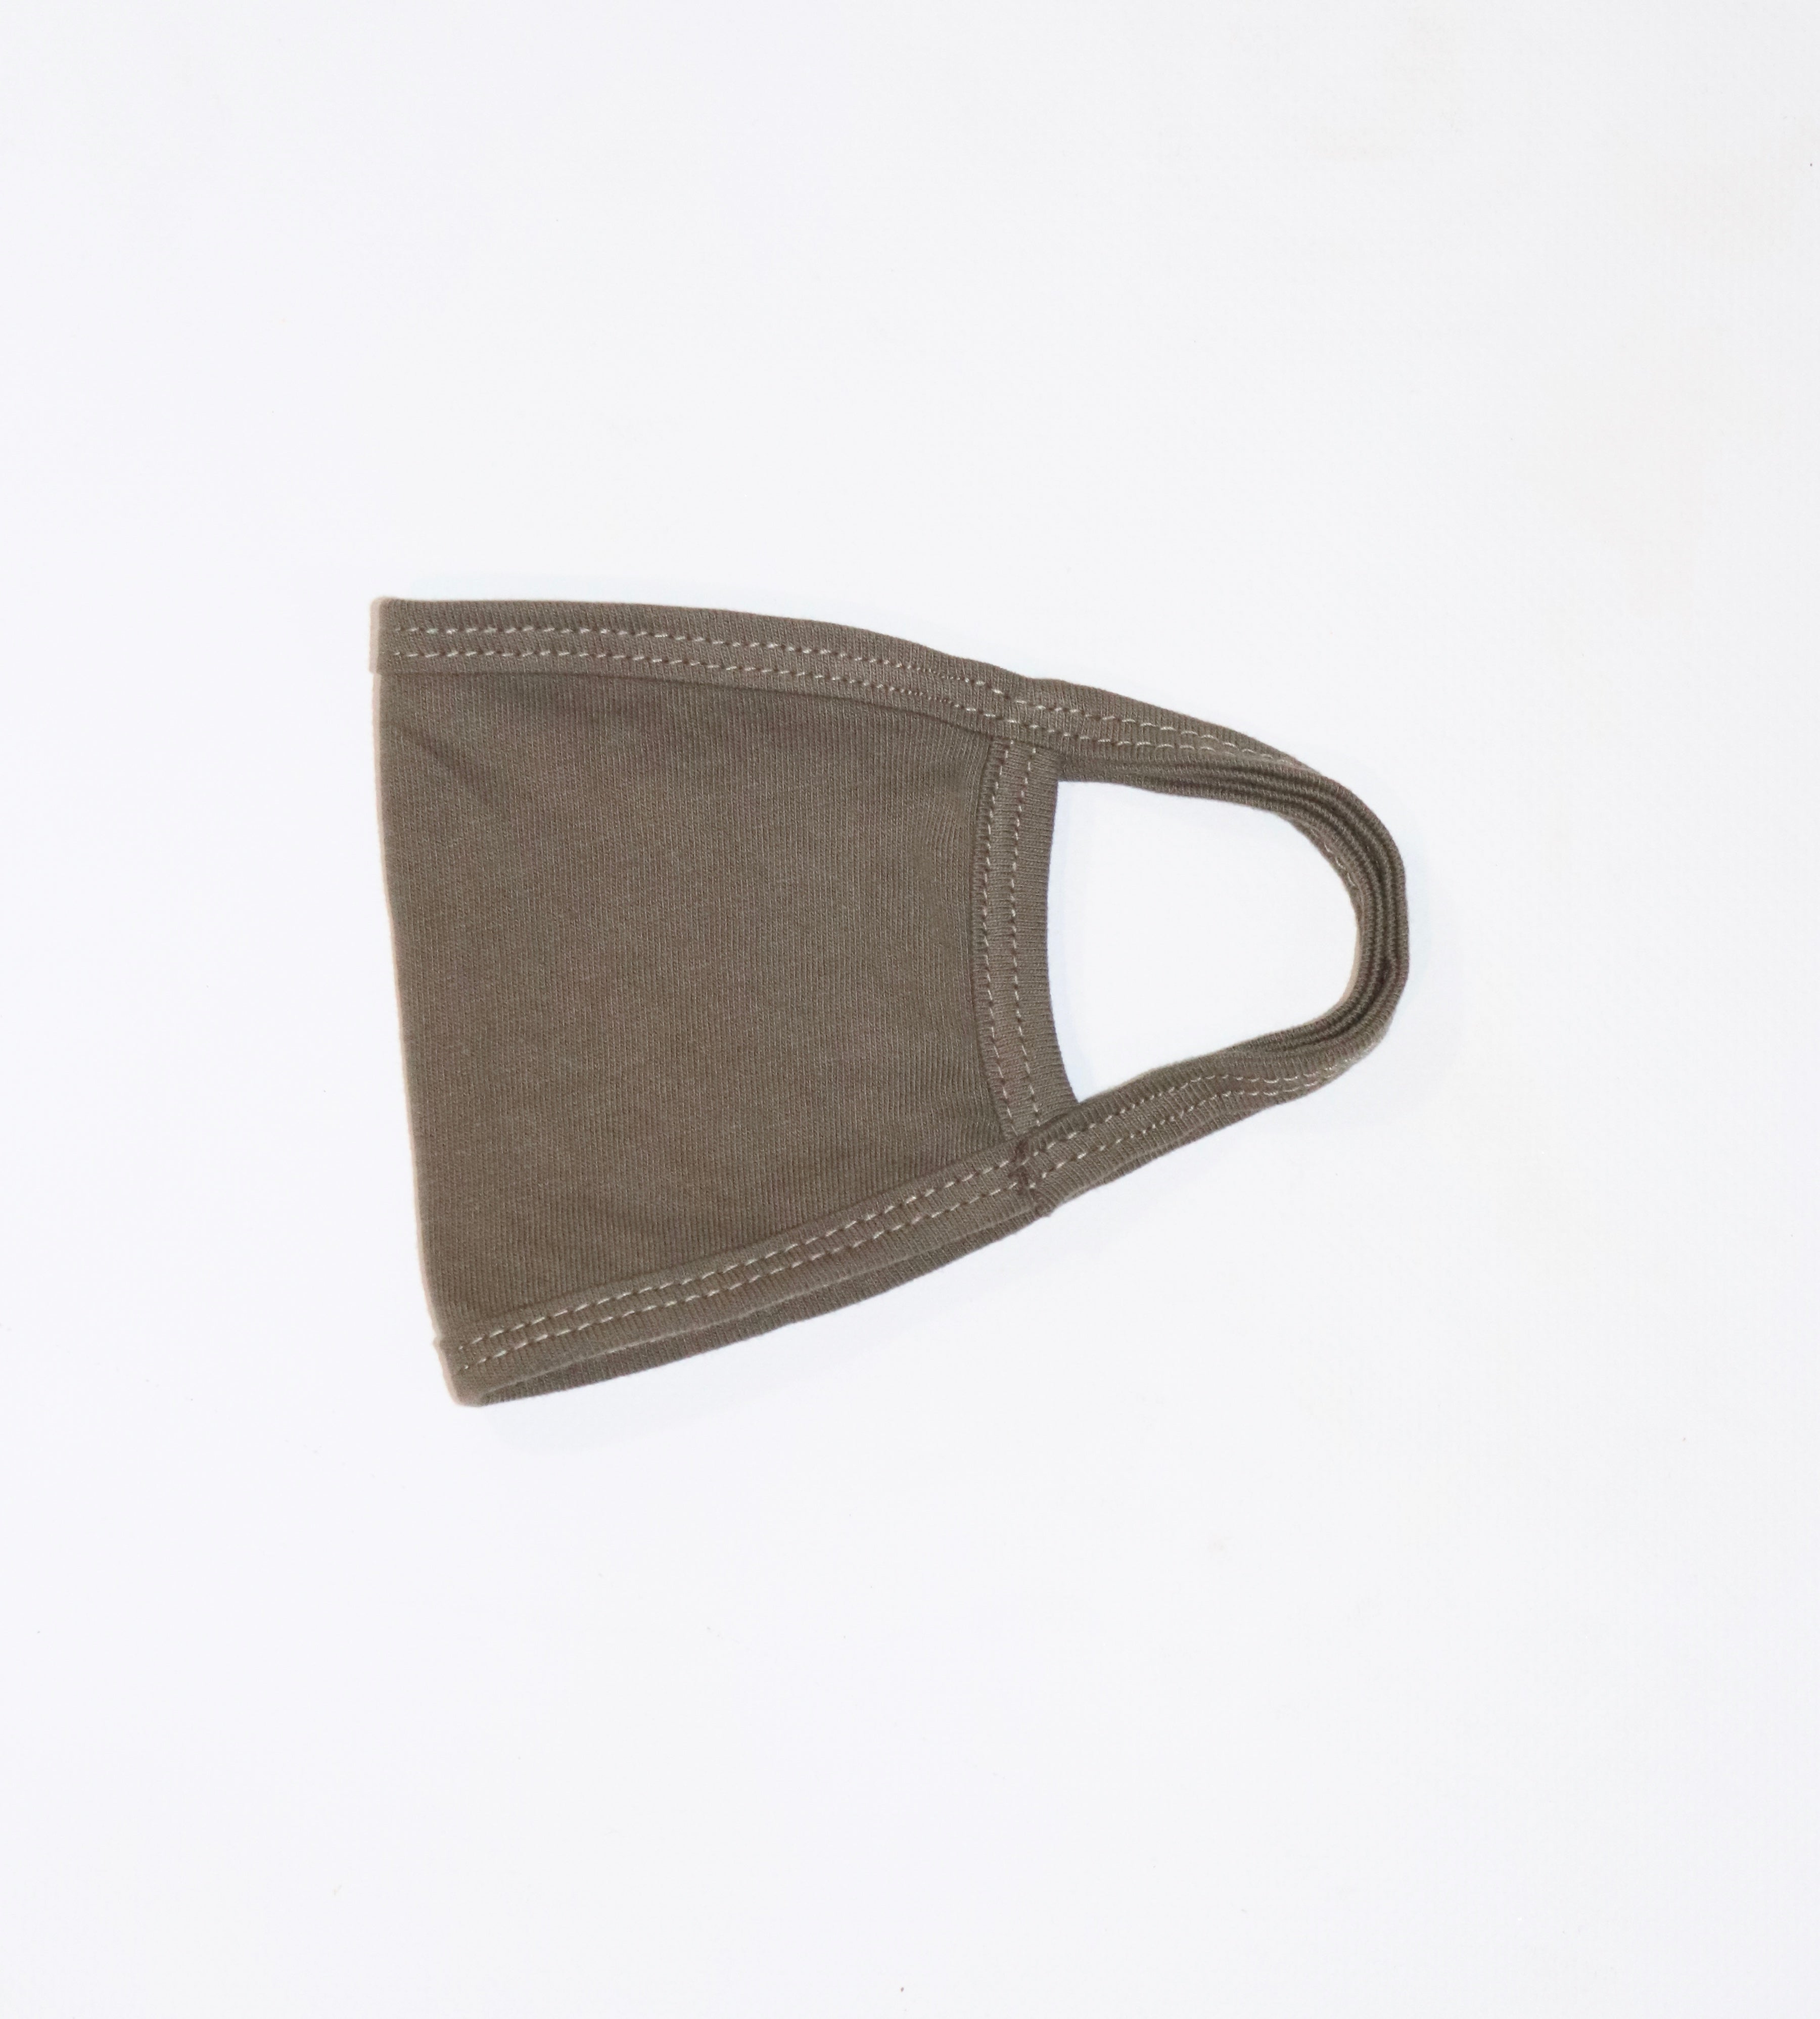 Plain Olive Green Fabric Mask- No Filter